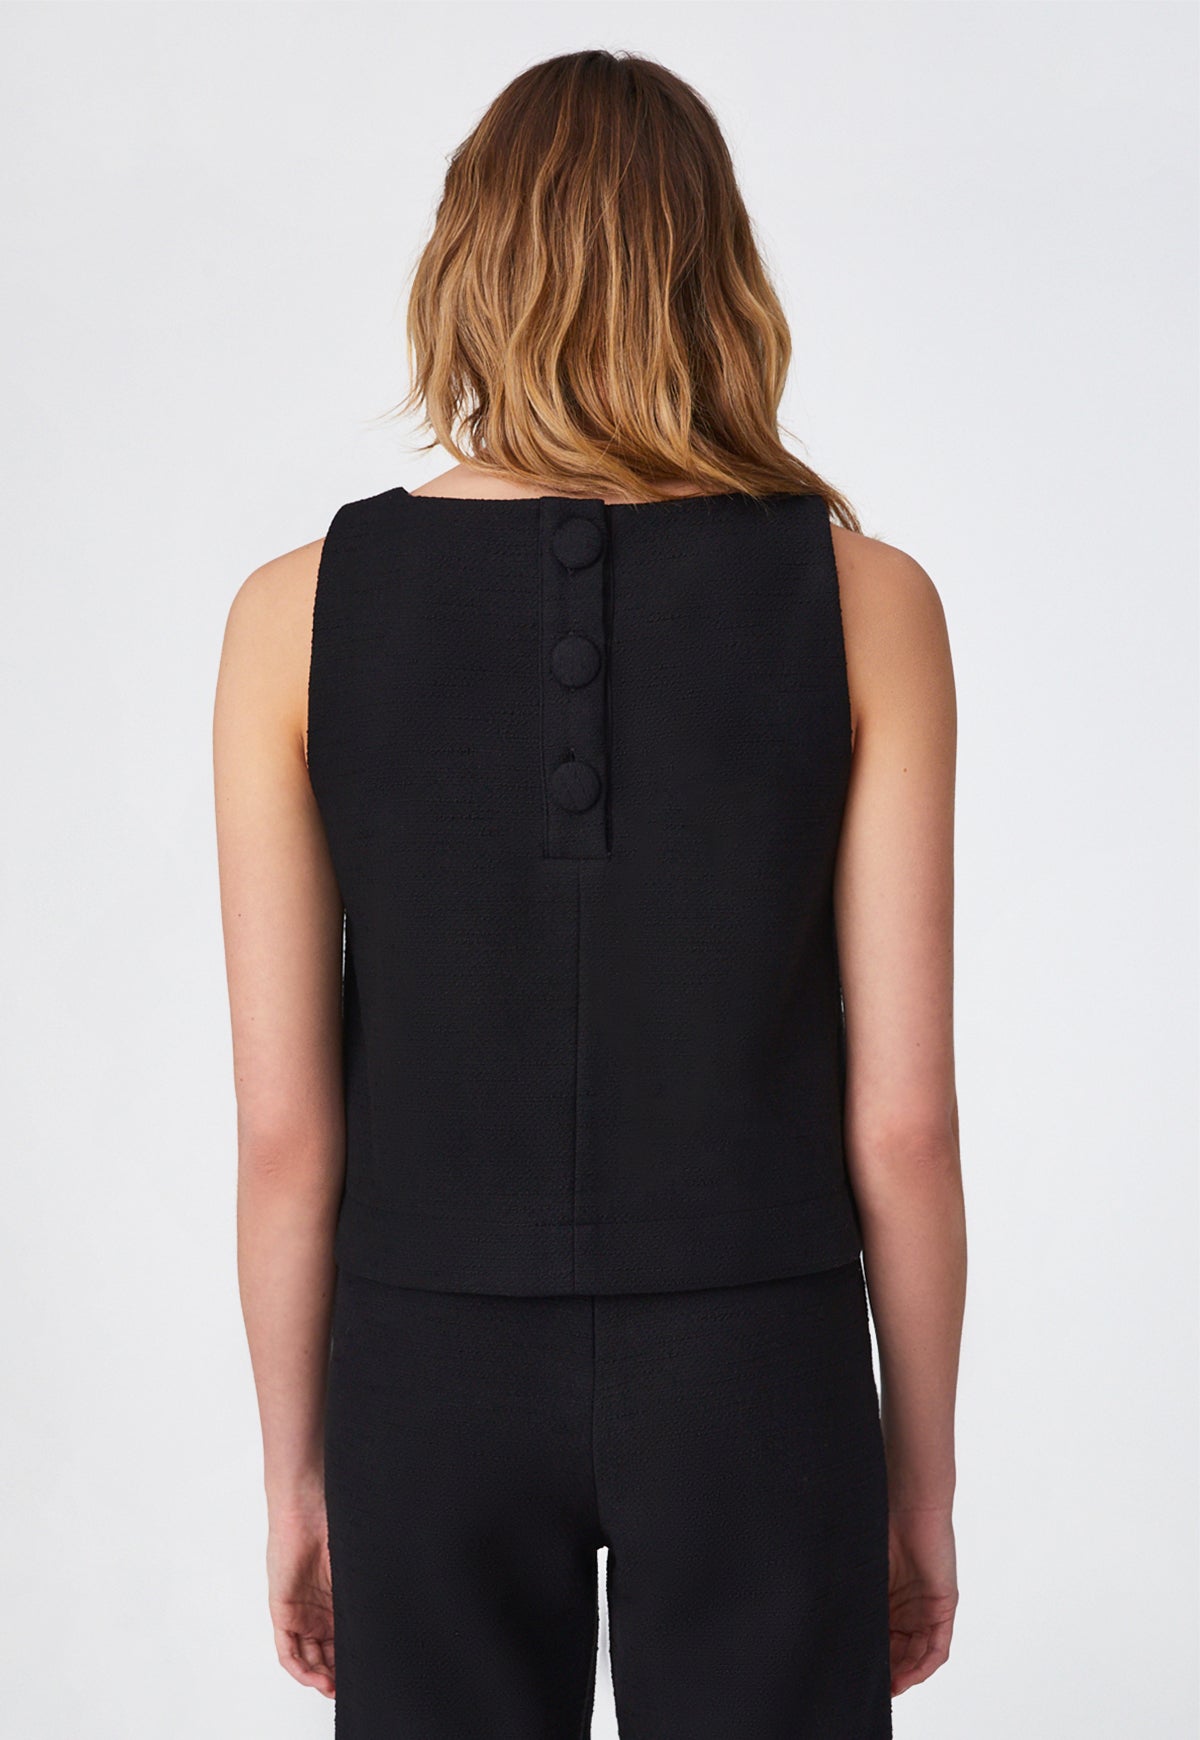 THE SLEEVELESS SHIFT TOP in BLACK TEXTURED COTTON